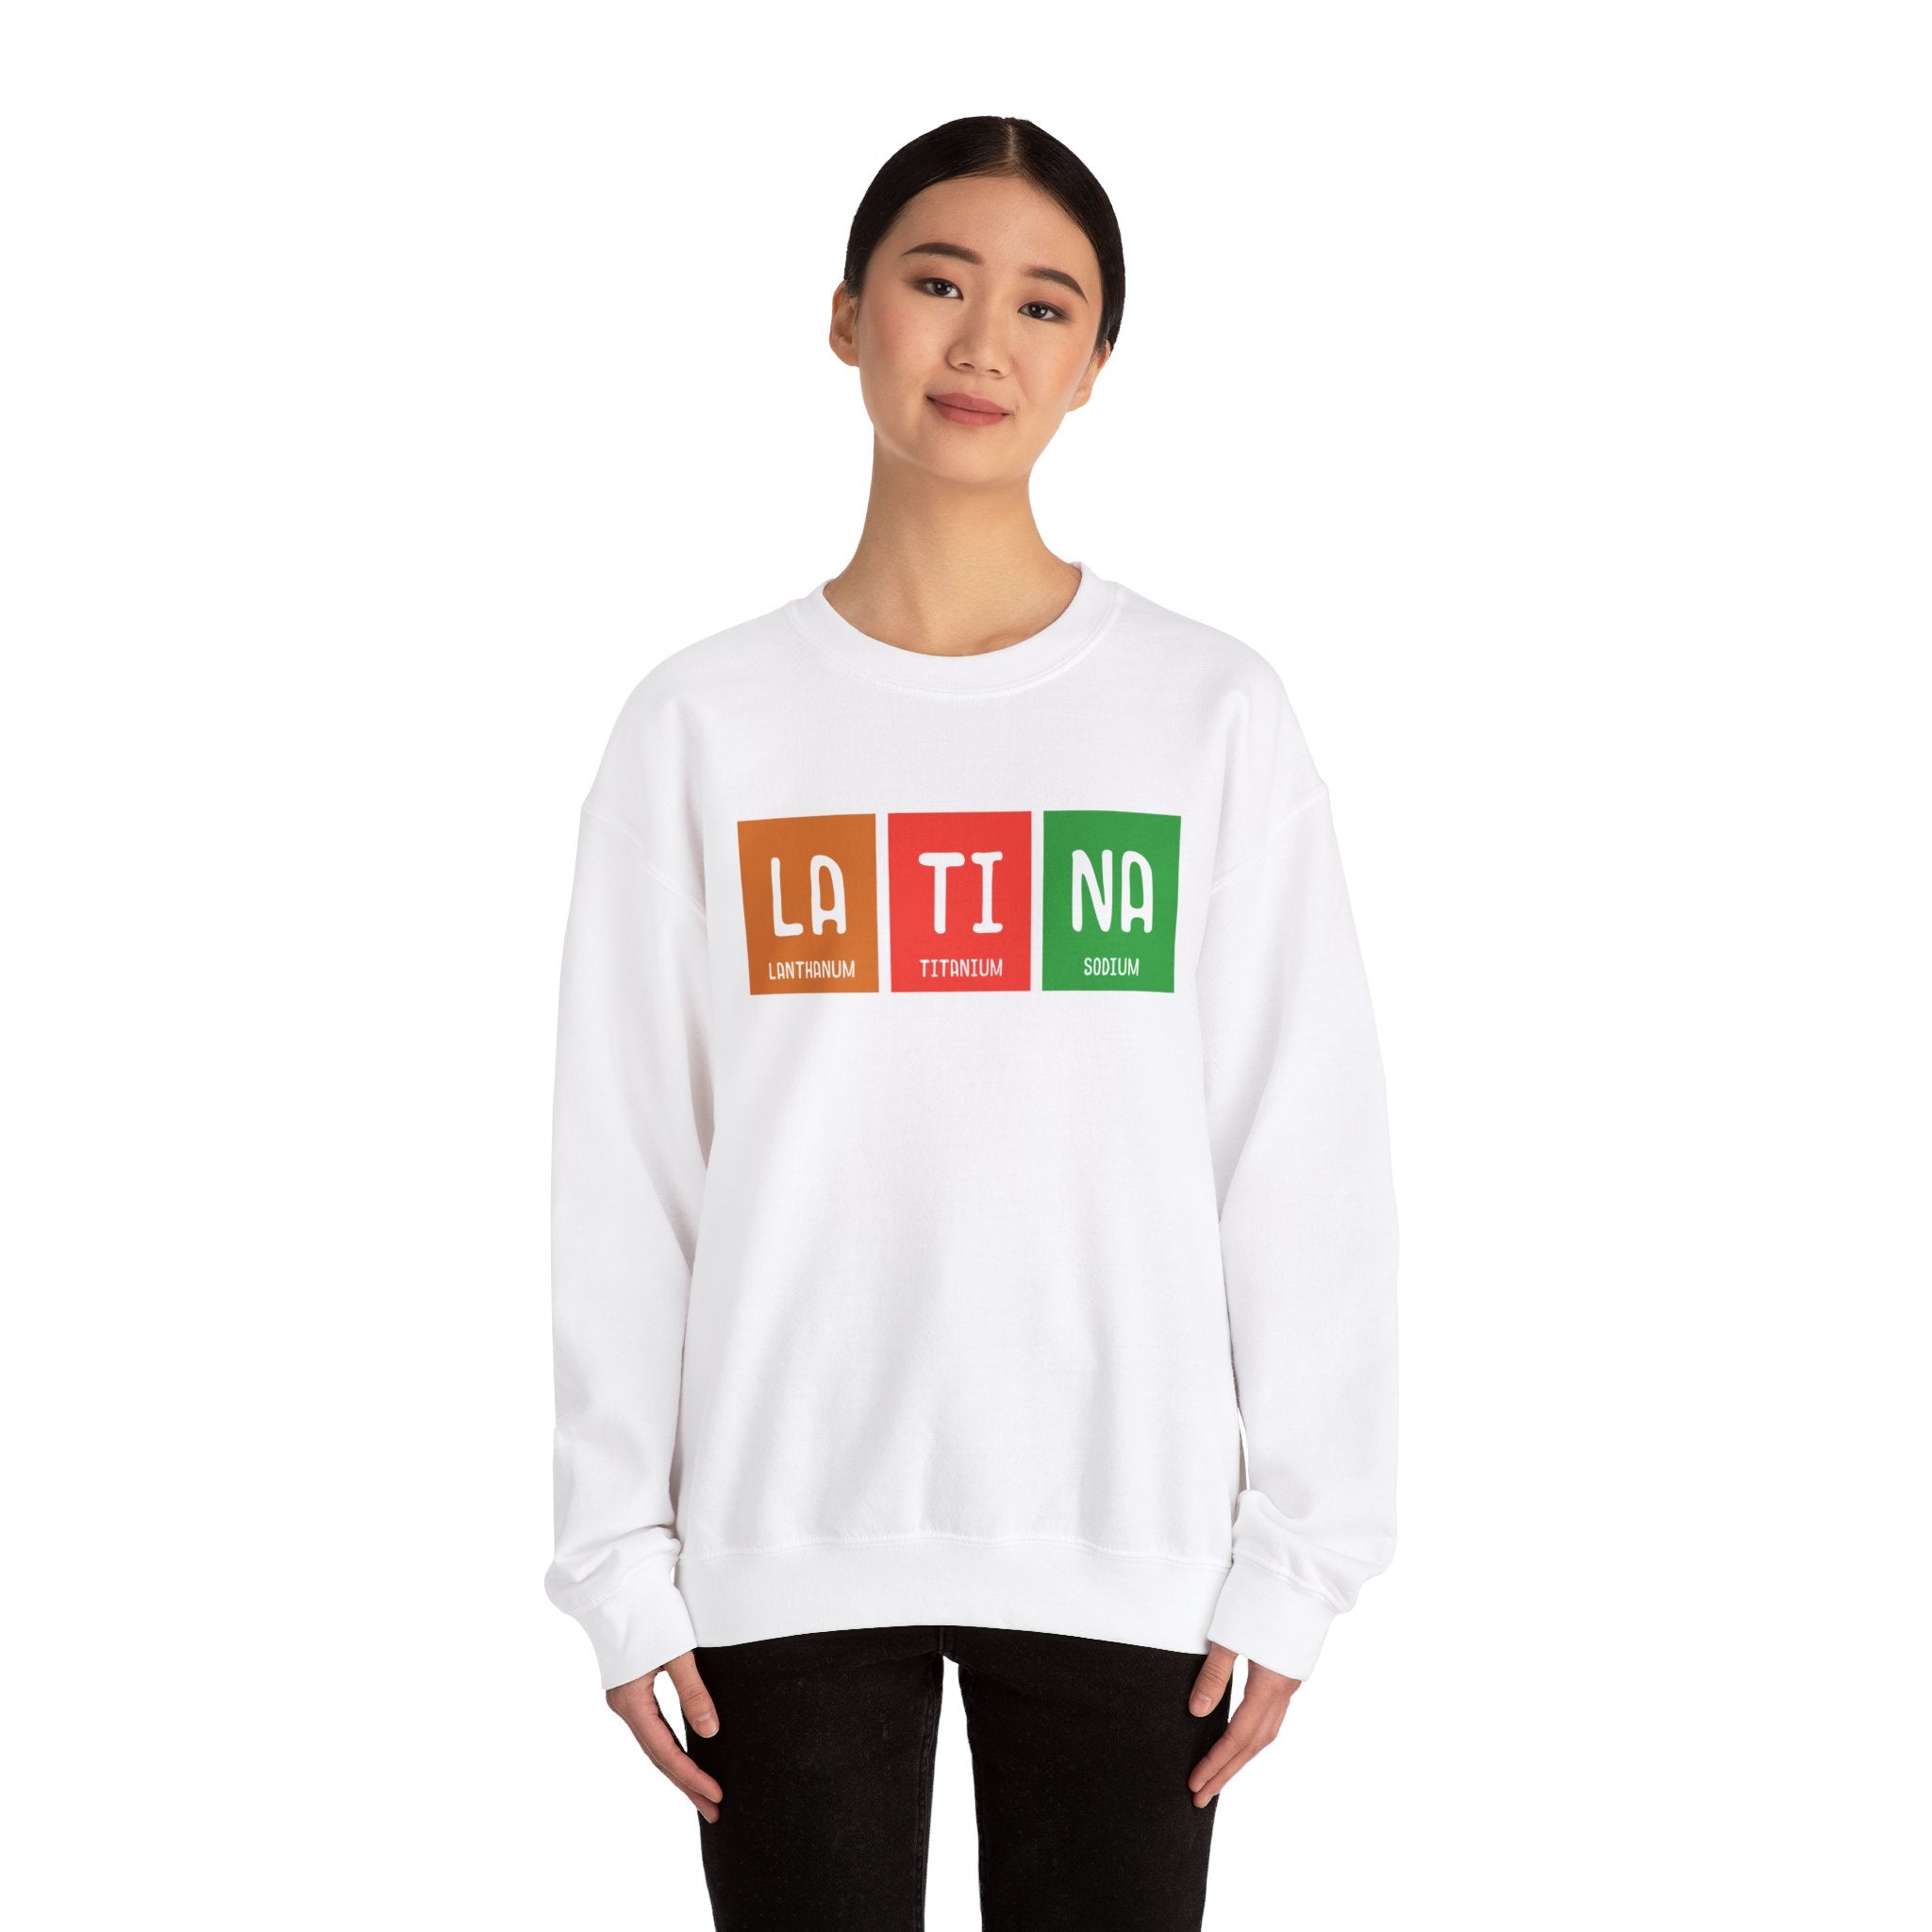 Person wearing a LA-TI-NA - Sweatshirt, a true winter essential, with "LATINA" spelled out using periodic table-style elements in red, orange, and green.